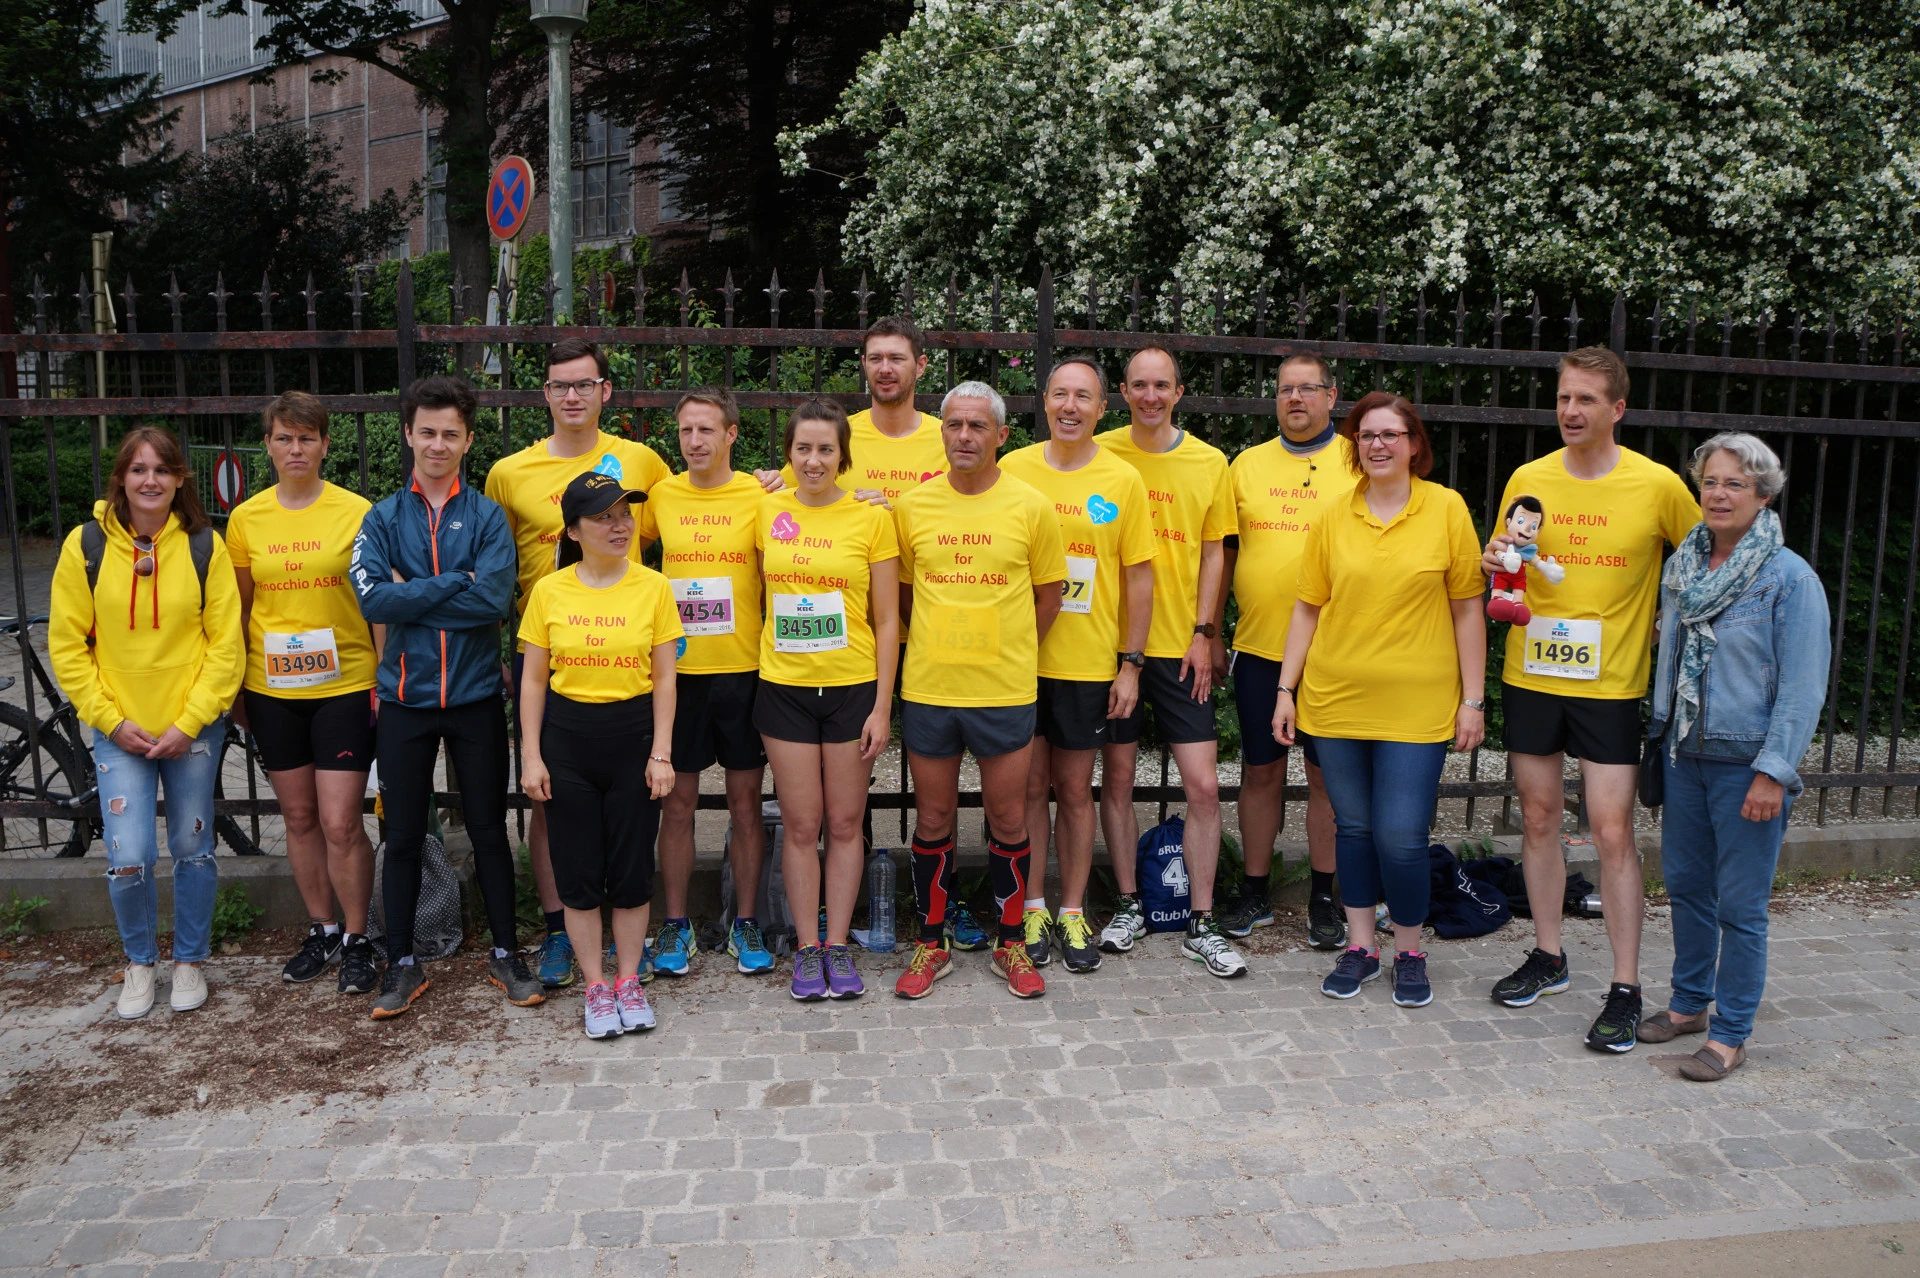 A team of employees in Belgium supports a local charity called, Pinocchio.